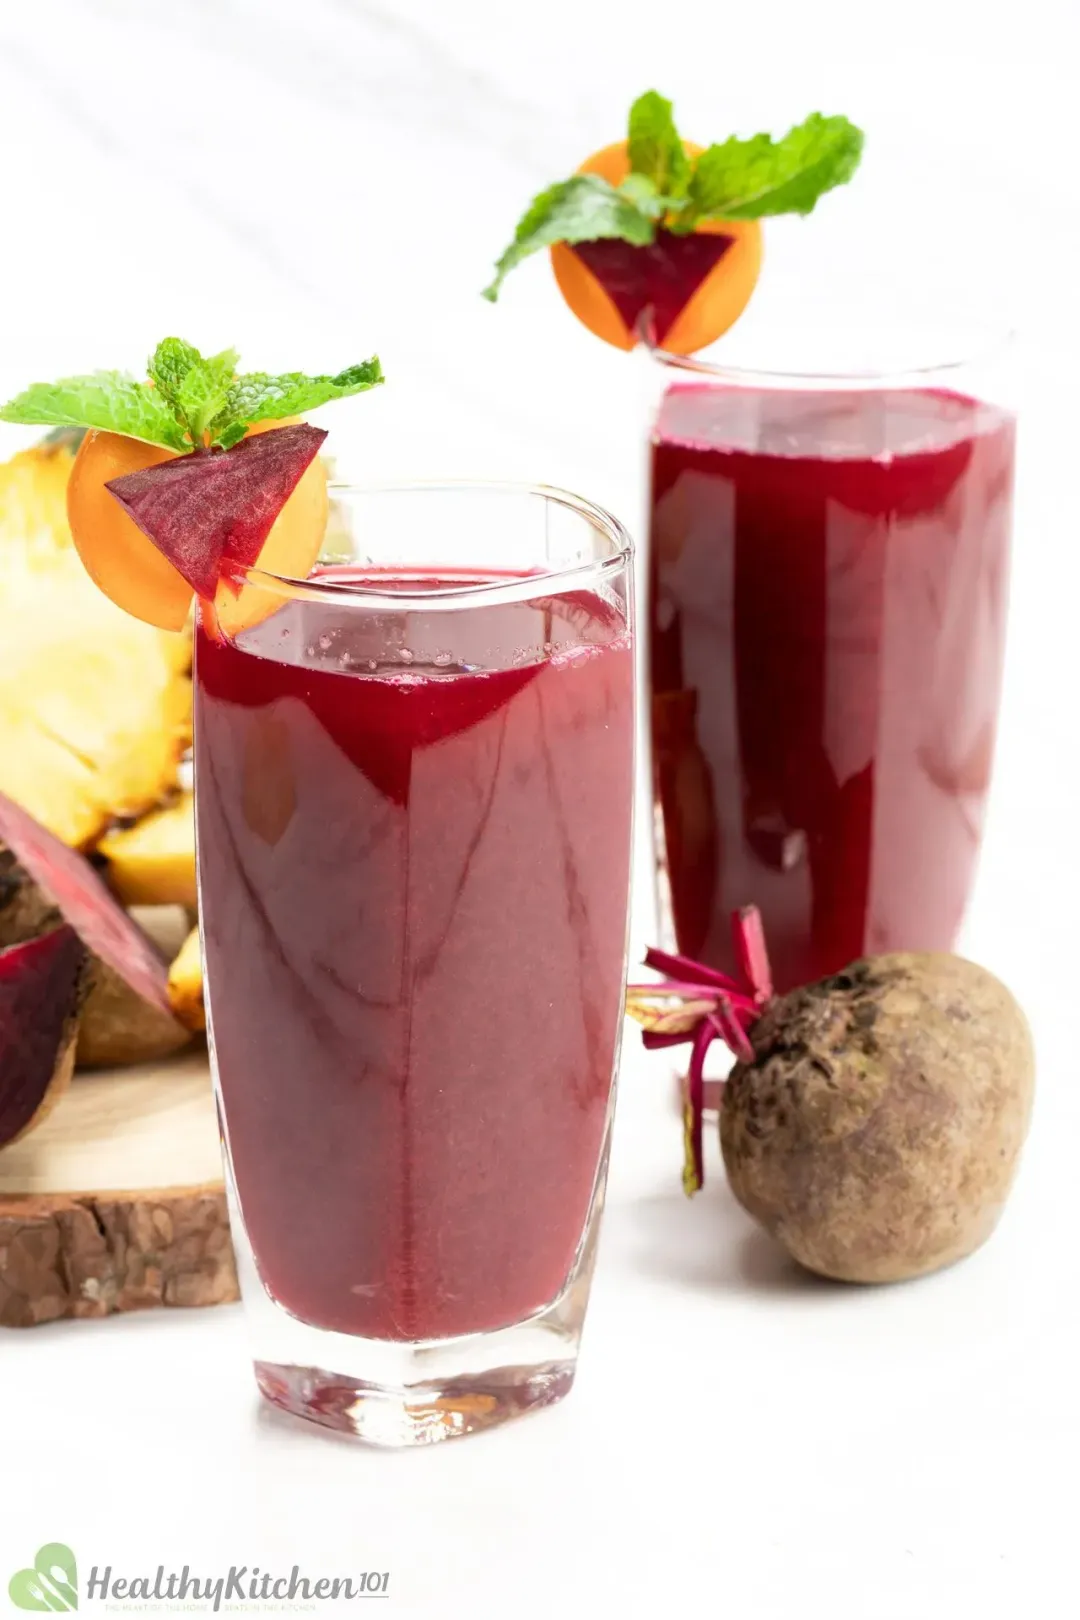 Two glasses of beet juice next to a beetroot and some pineapples in the back